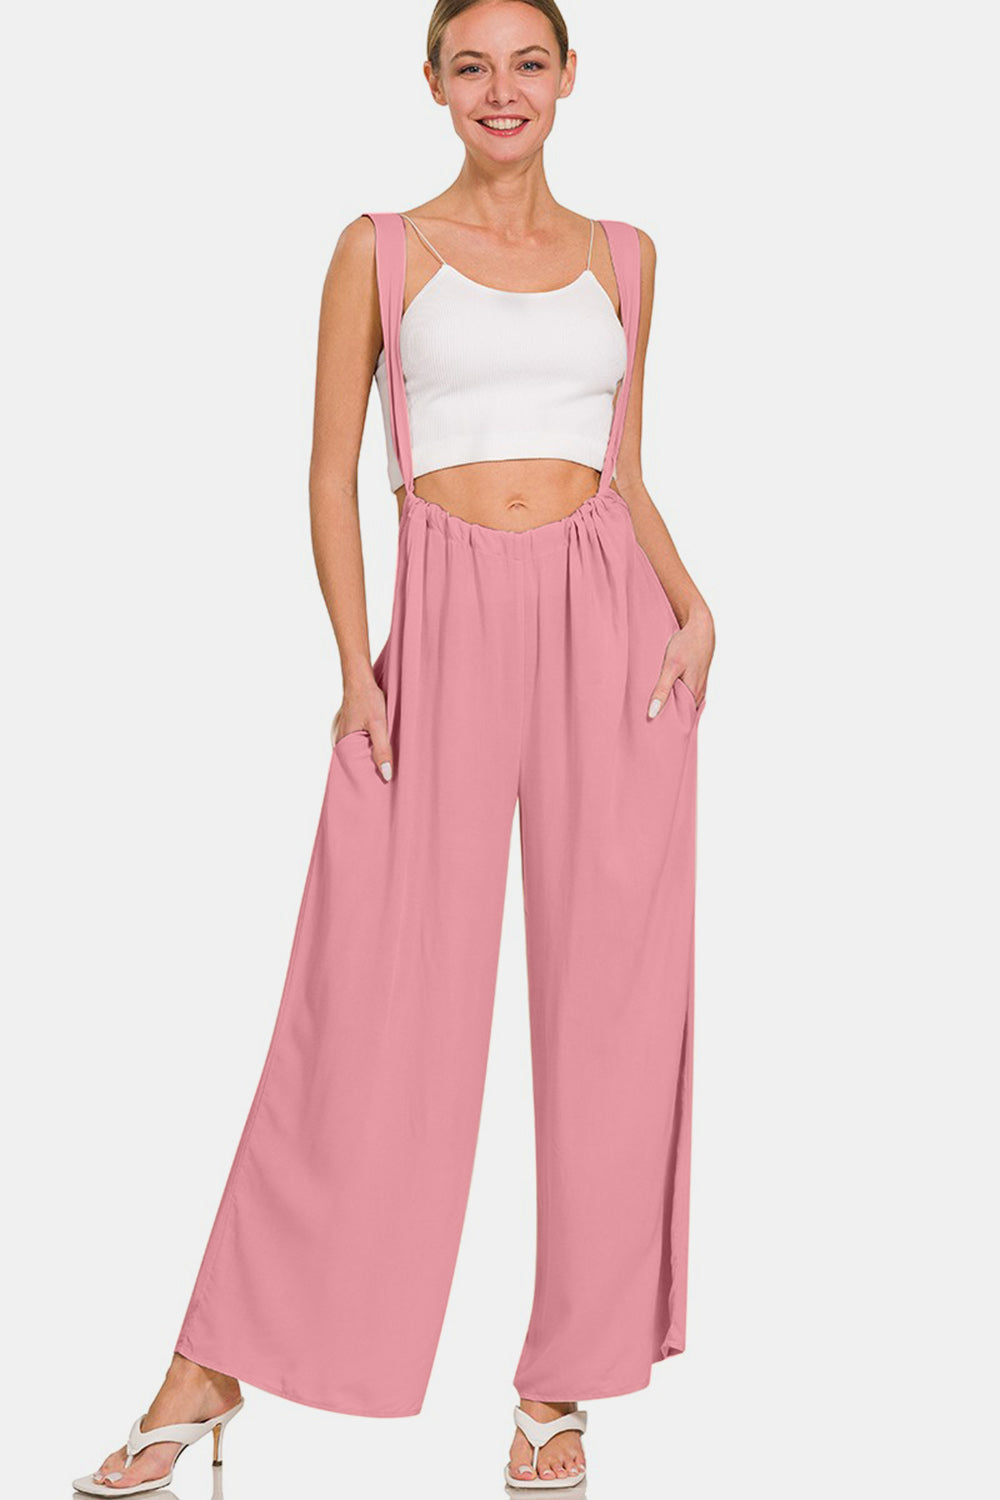 Zenana Pocketed Wide Strap Wide Leg Overalls Sunset and Swim Lt Rose S 